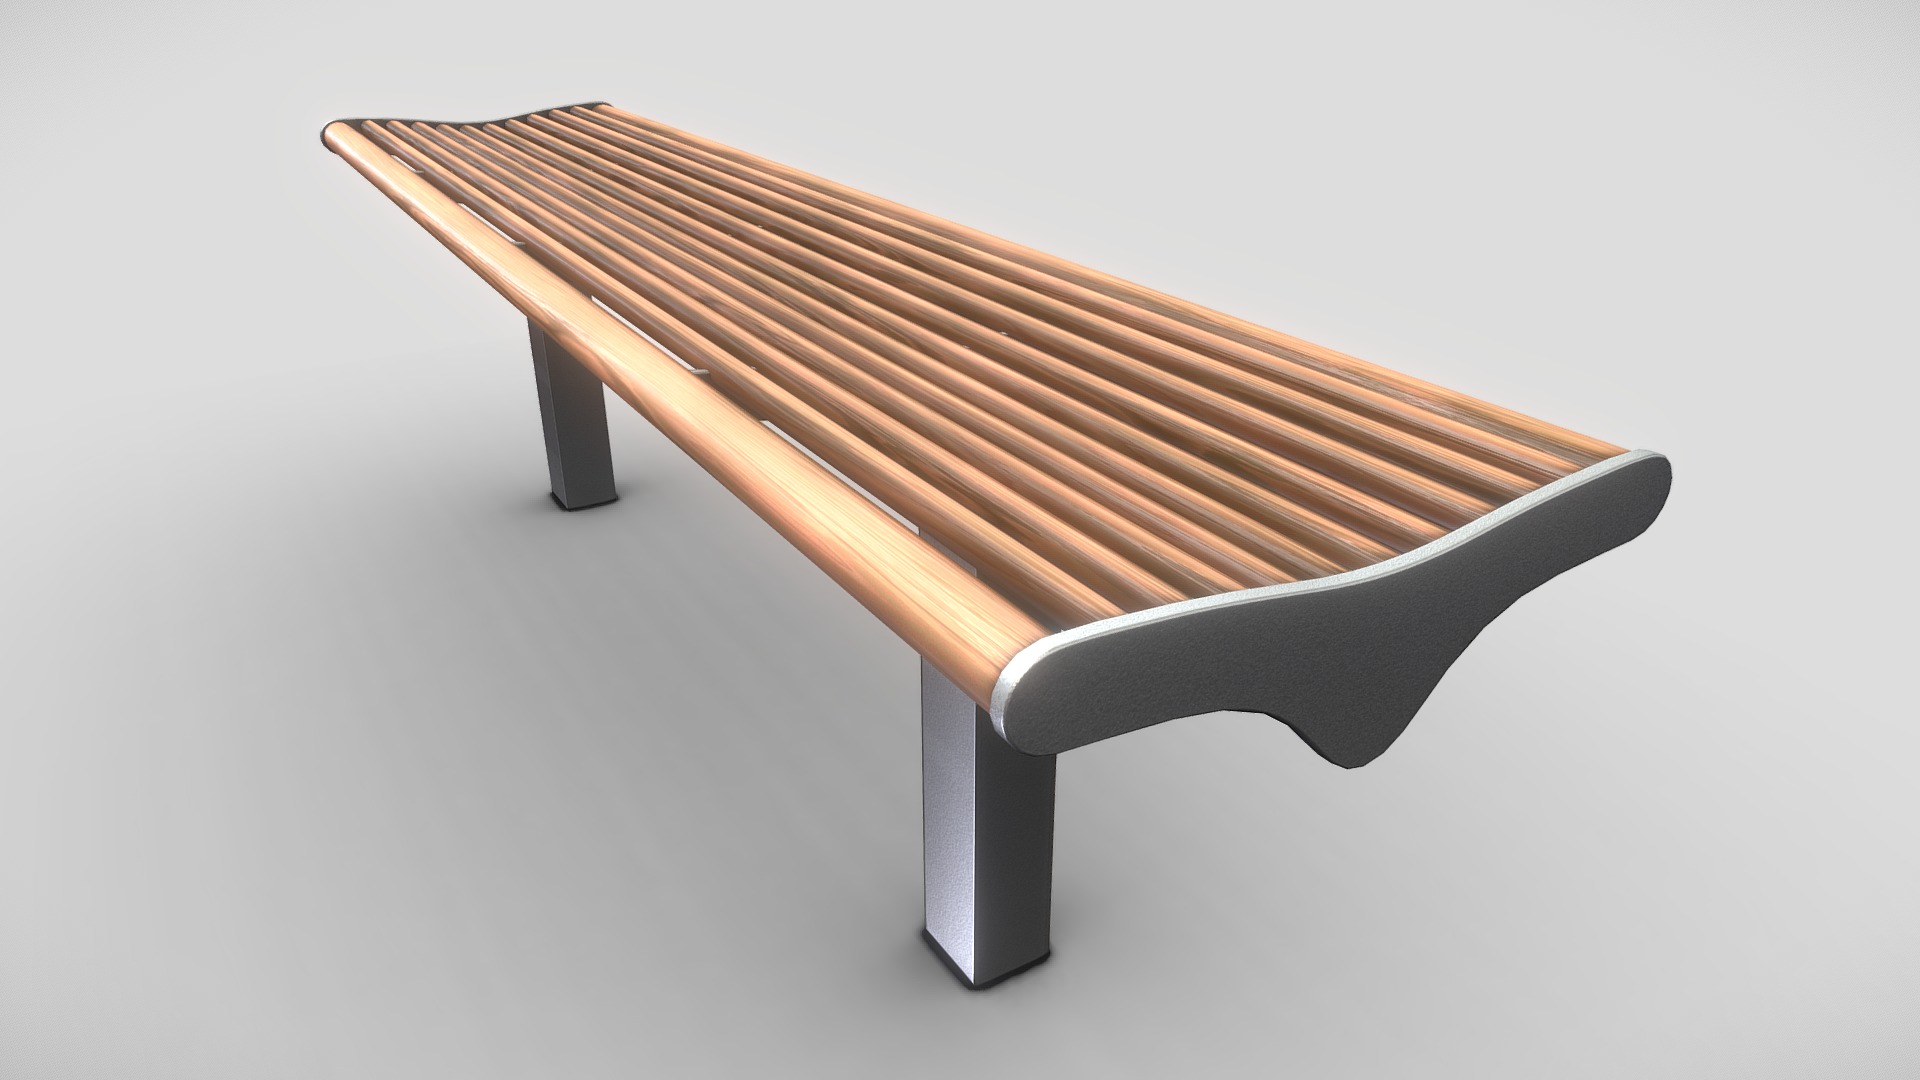 3D model Bench [5] (Low-Poly) (Wood Steel Mixed) - This is a 3D model of the Bench [5] (Low-Poly) (Wood Steel Mixed). The 3D model is about a wooden table with a white background.